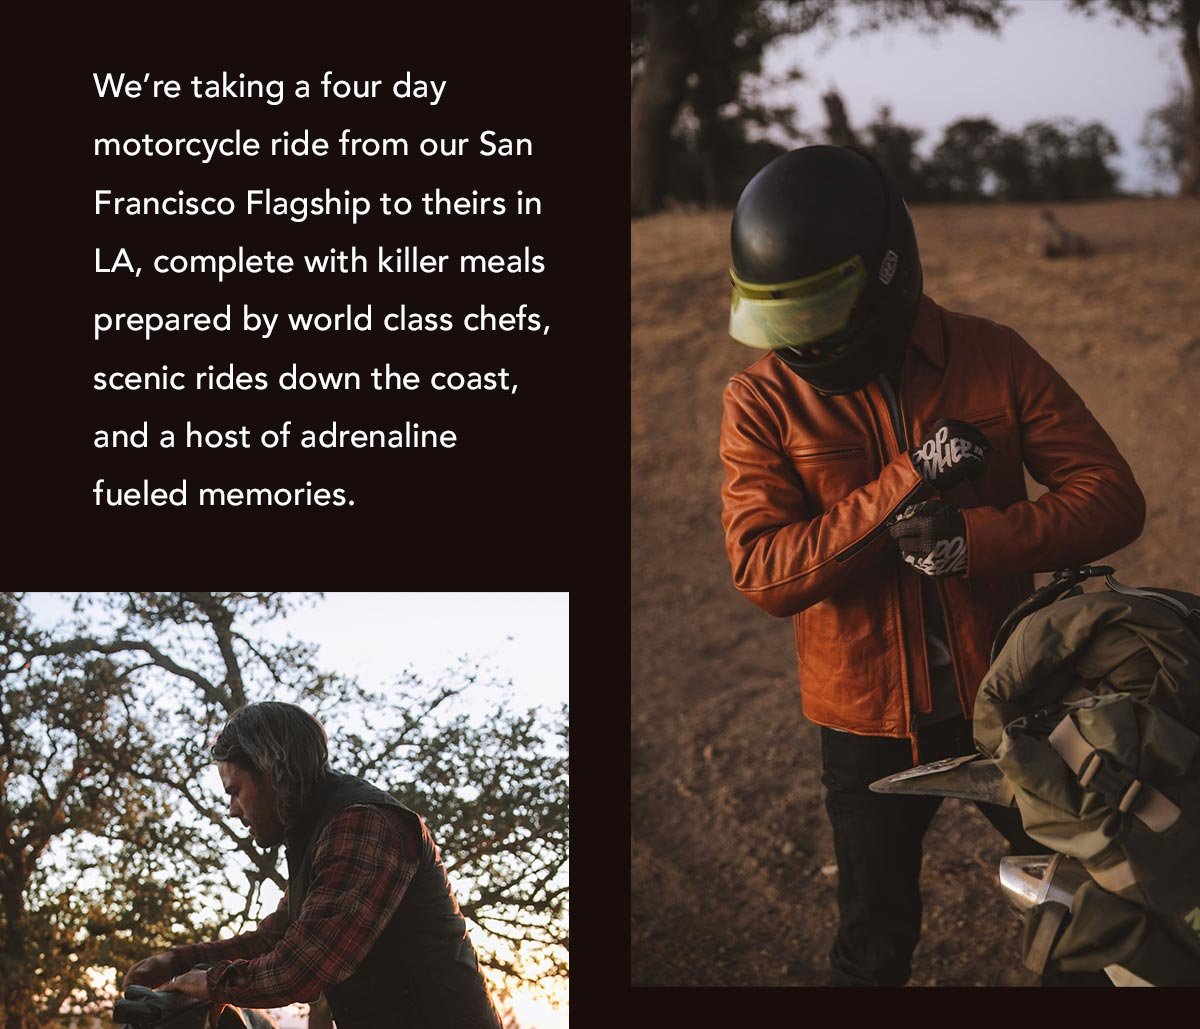 We’re talking a four day motorcycle ride from our HQ in San Francisco to theirs in LA, complete with killer meals prepared by world class chefs, scenic rides down the coast, and a host of adrenaline fueled memories.